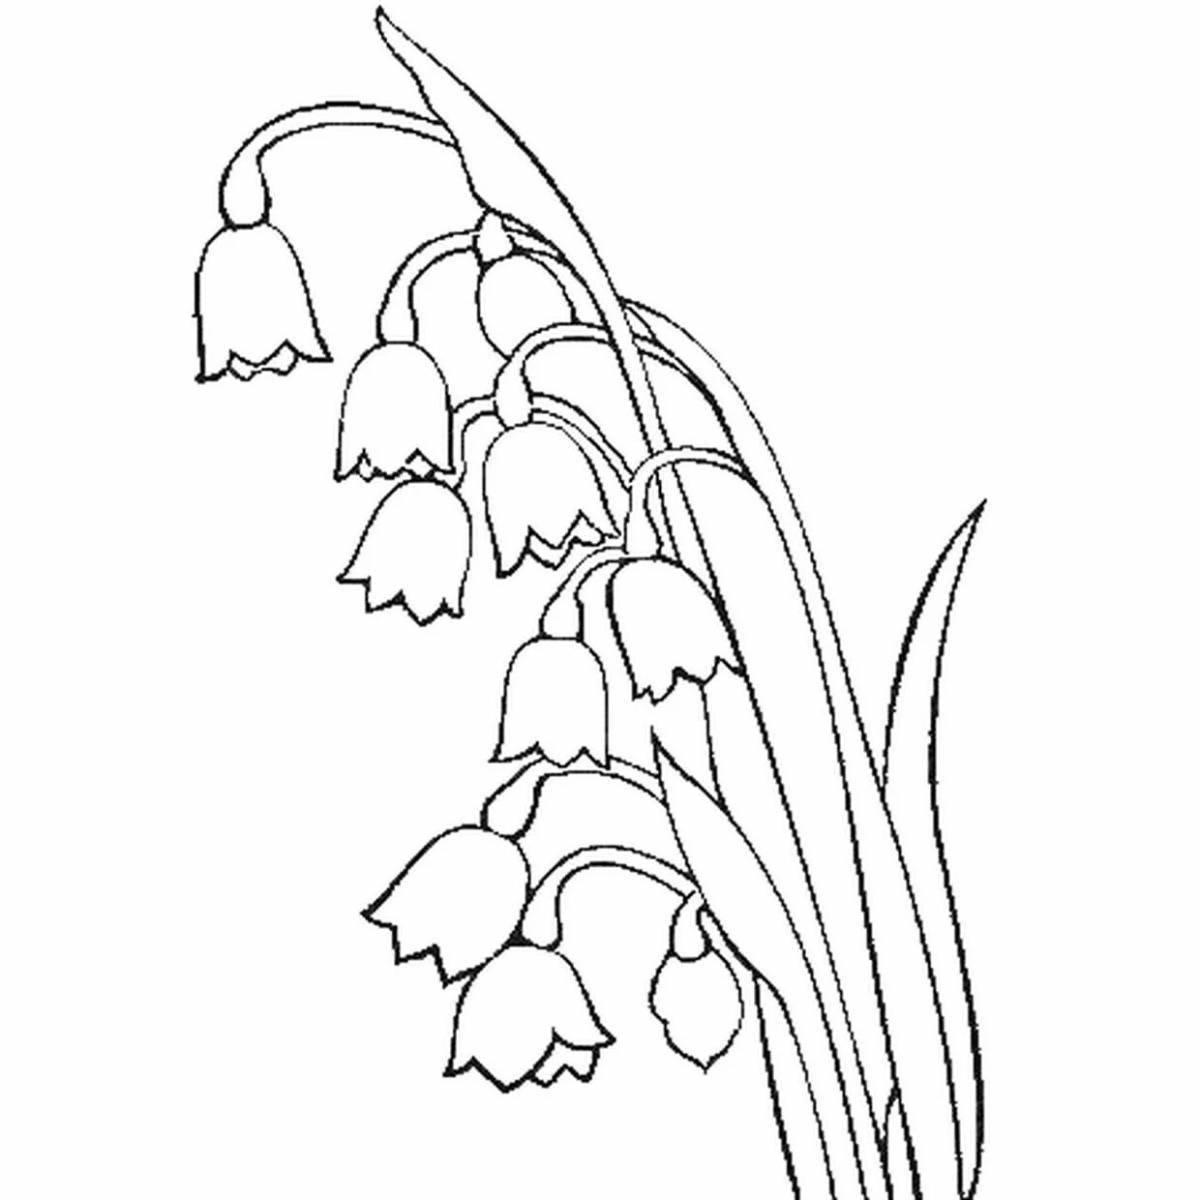 Animated lily of the valley coloring book for kids